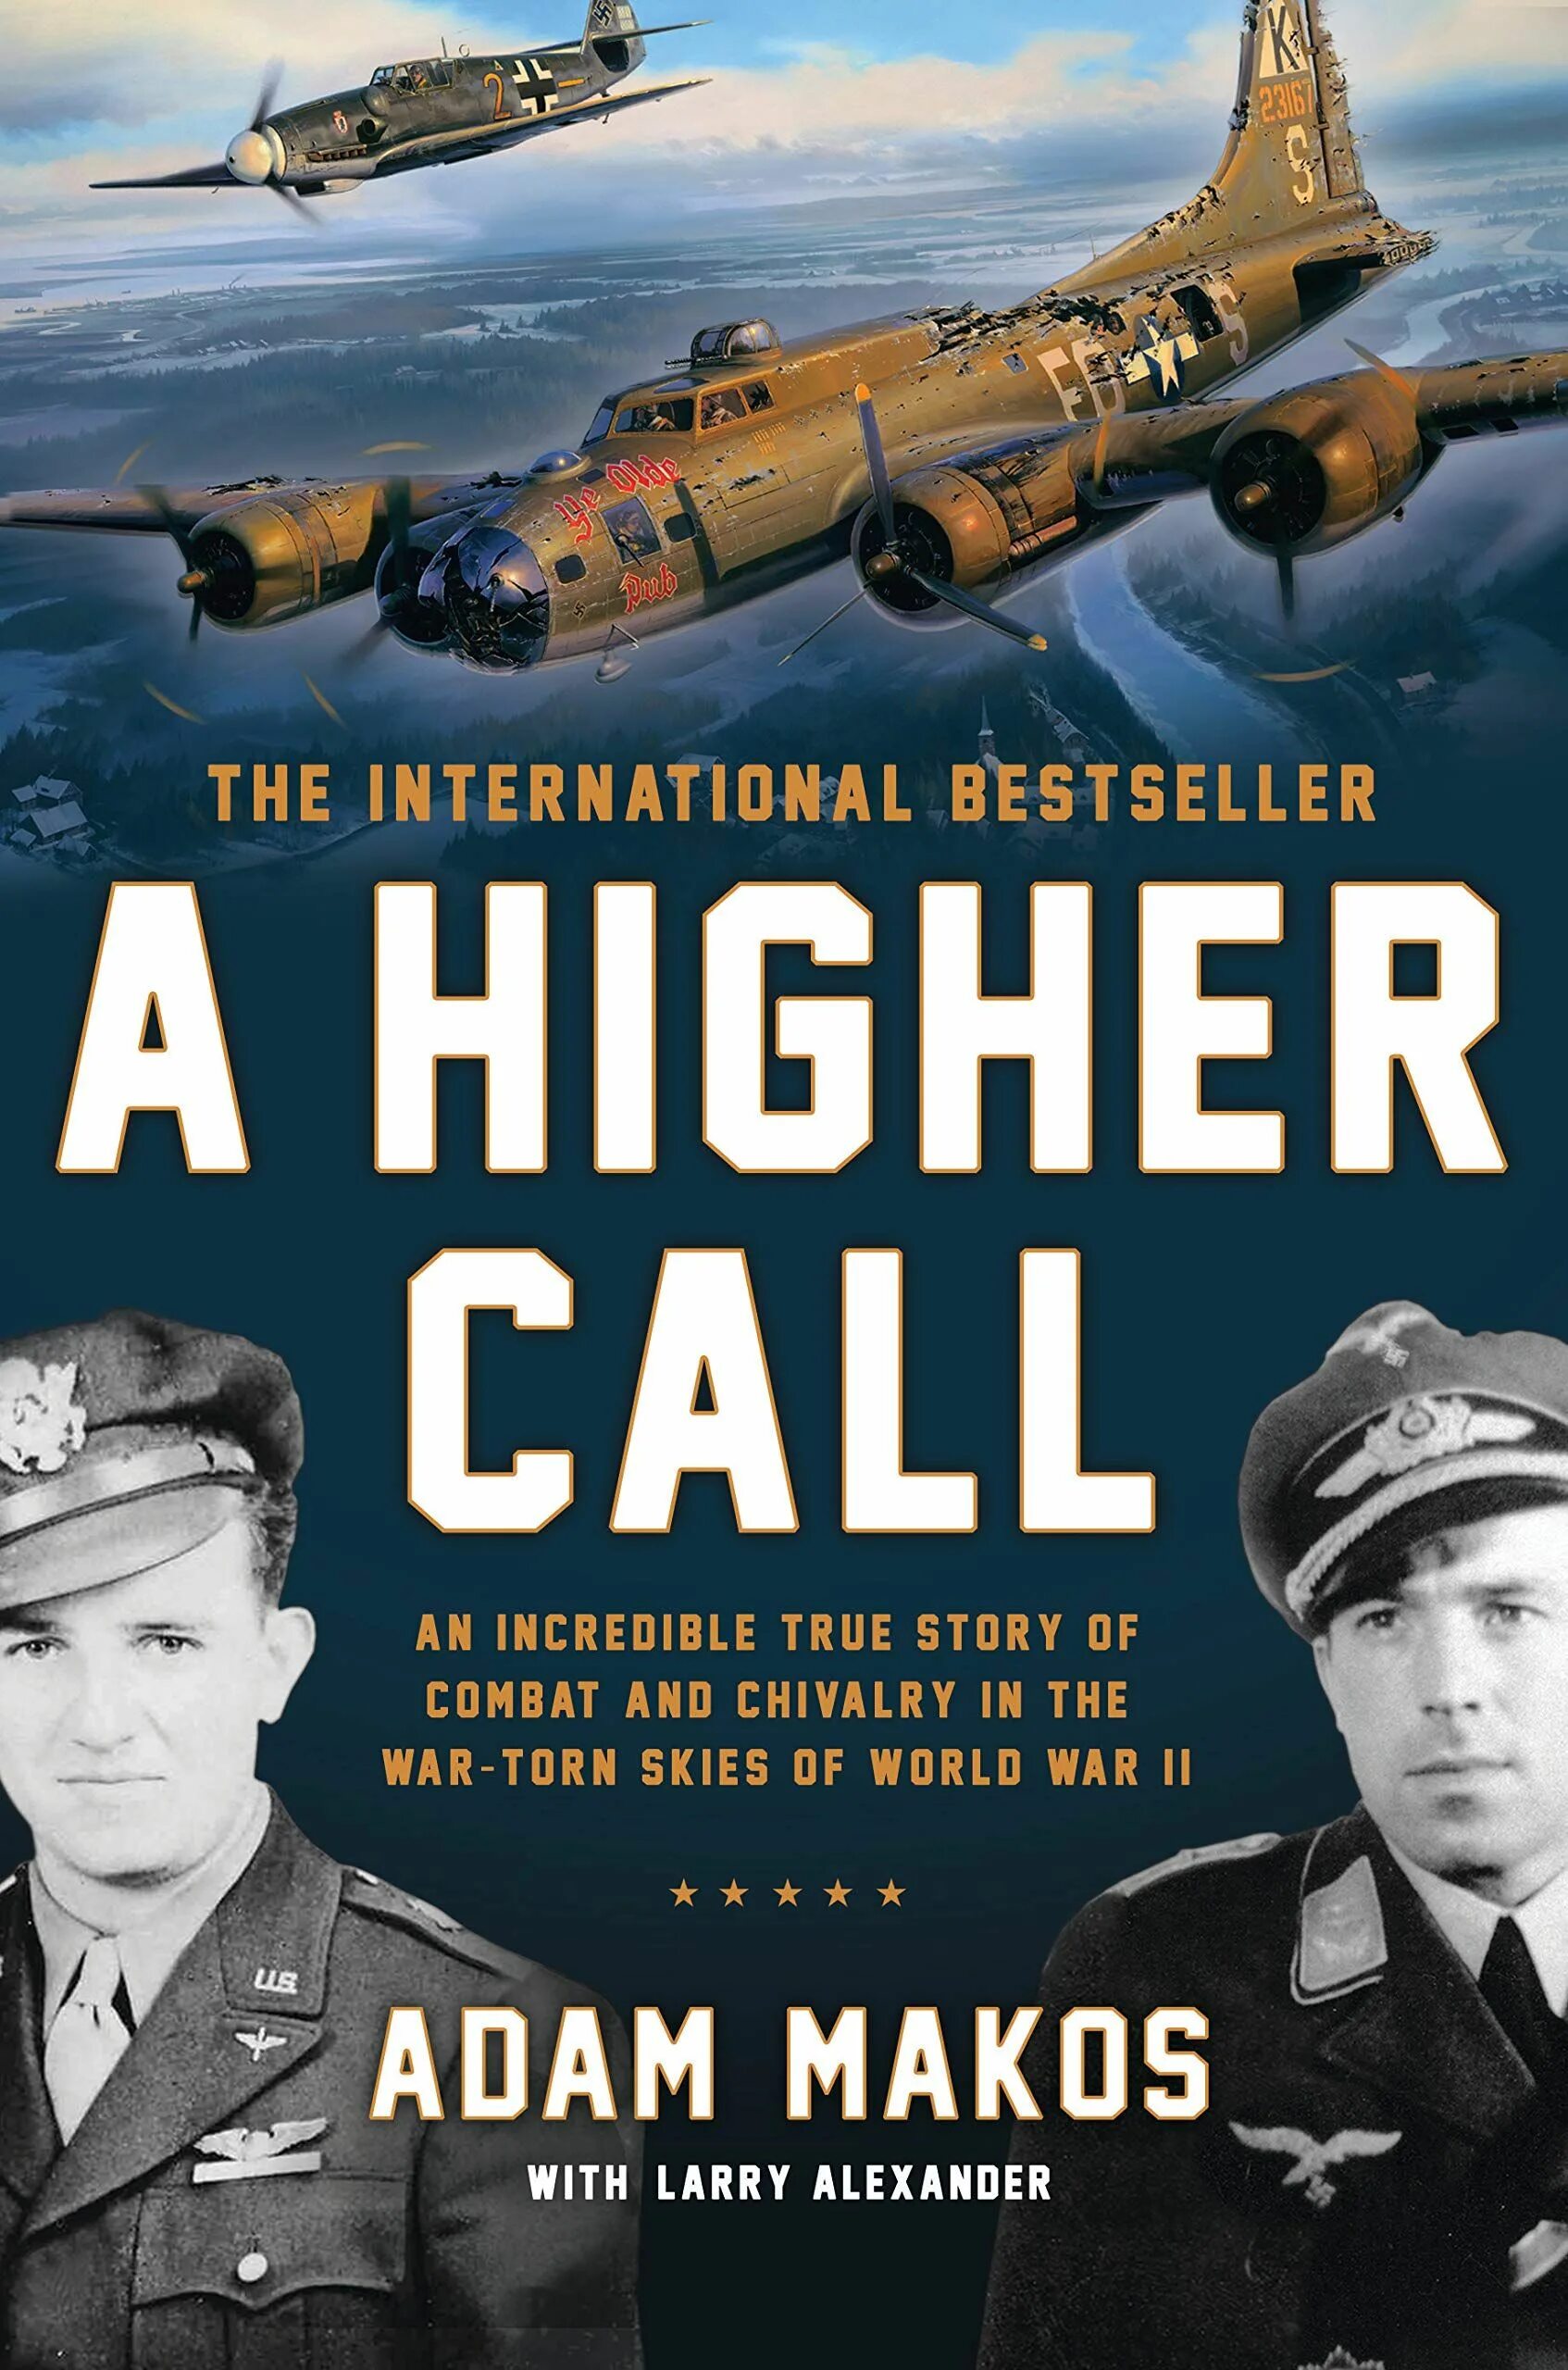 Higher call. A higher Call. A higher Call книга на русском. The higher calling COMMY book.